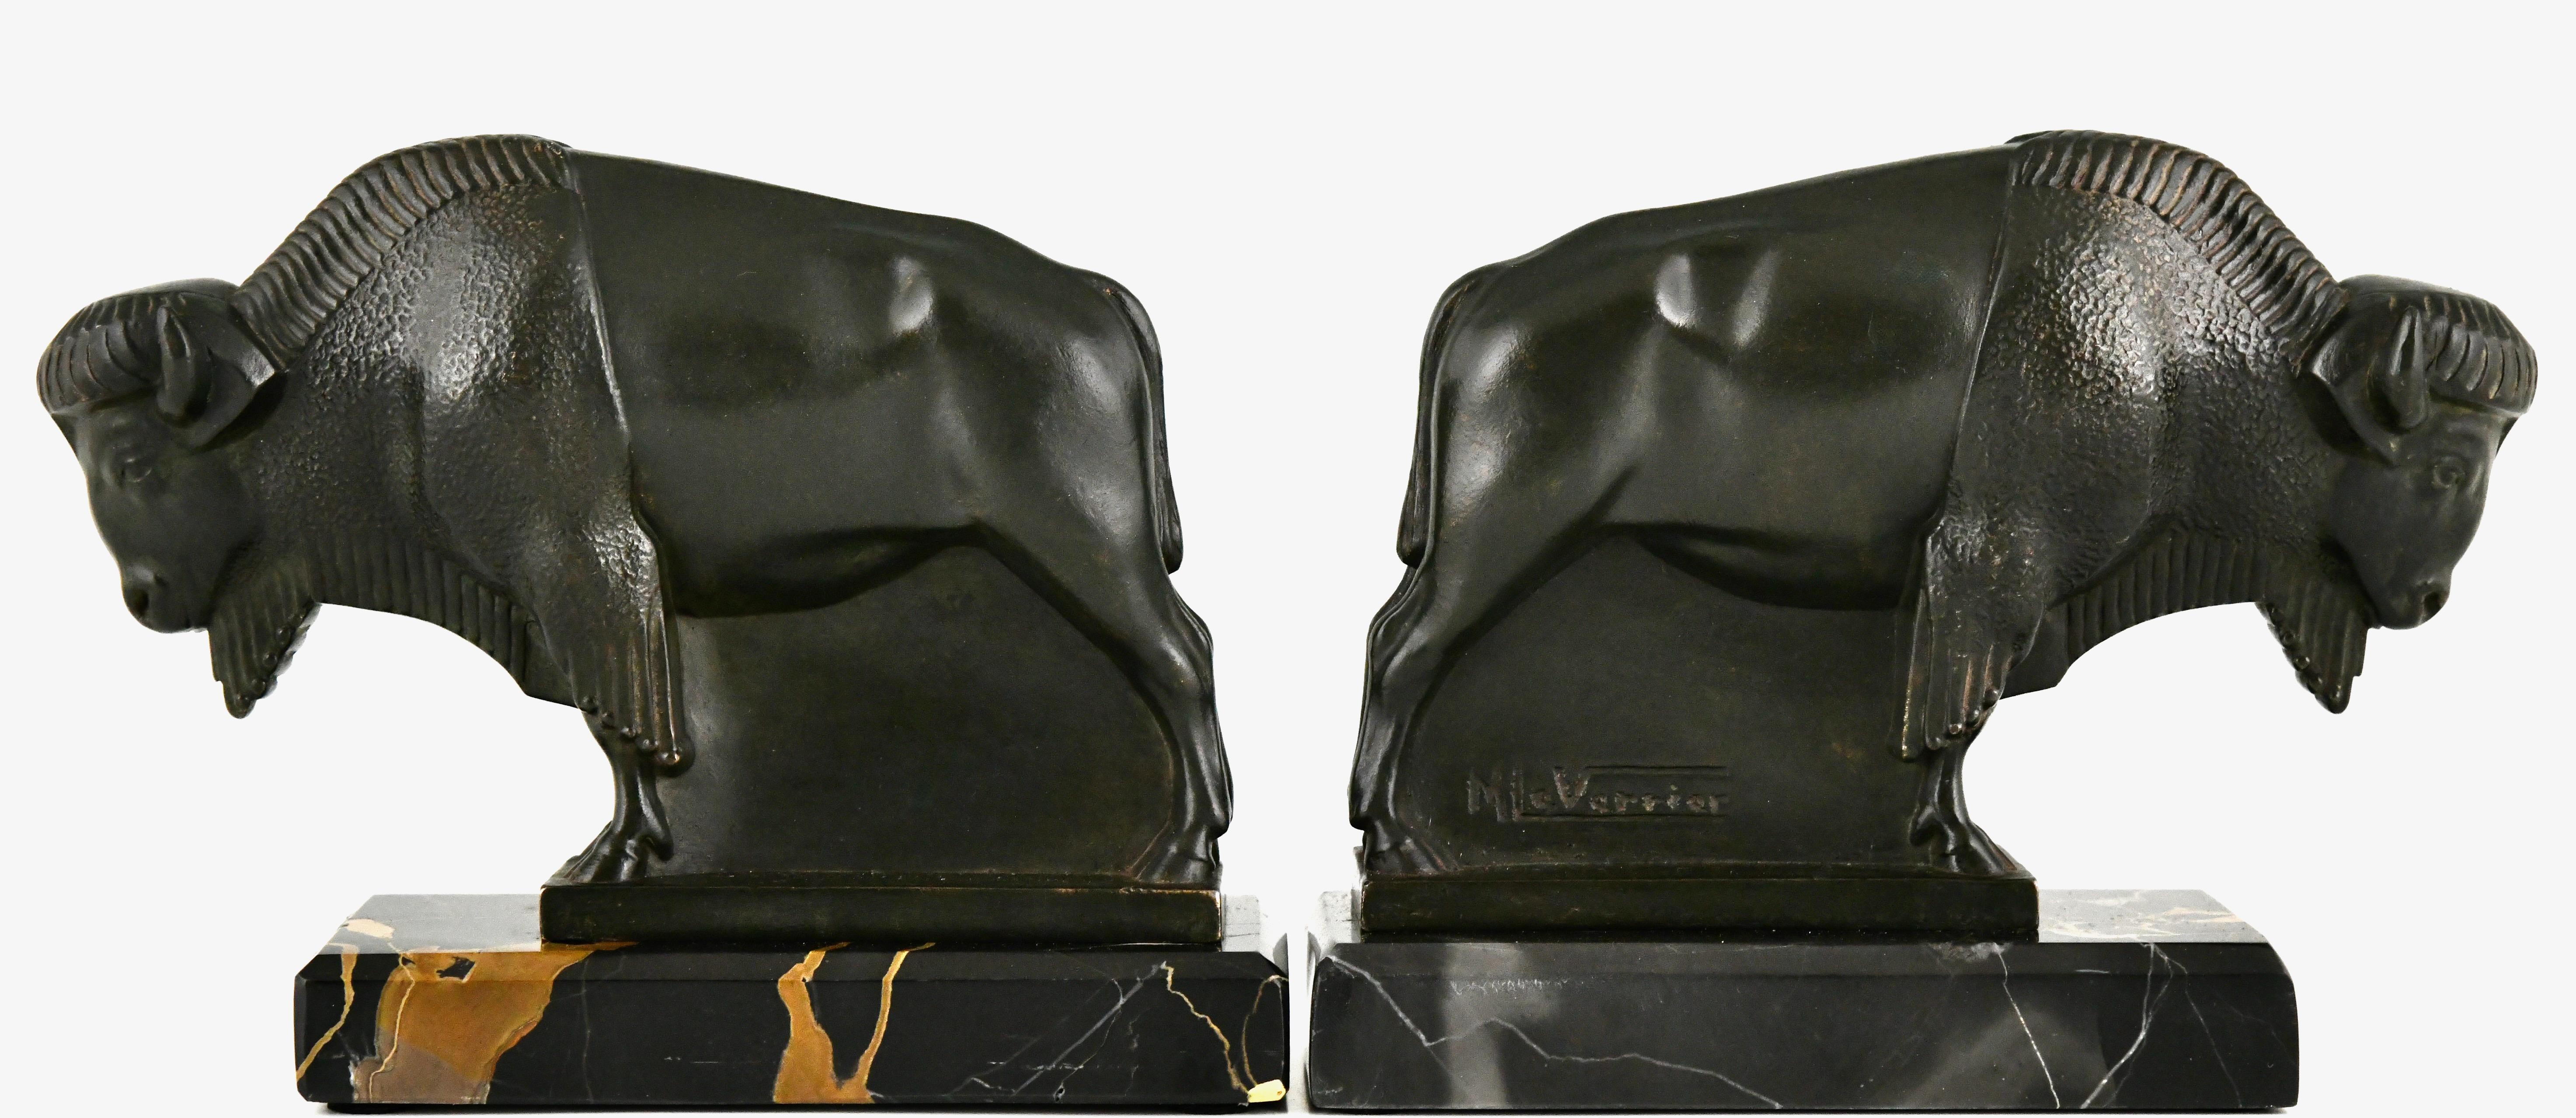 Art Deco bison bookends by the French artist Max Le Verrier. 
Patinated Art Metal on a Portor marble base. 
France 1930

Art Deco sculpture, Victor Arwas, Academy. 
Bronzes, sculptors and founders, H. Berman, Abage. 
Dictionnaire des peintres,